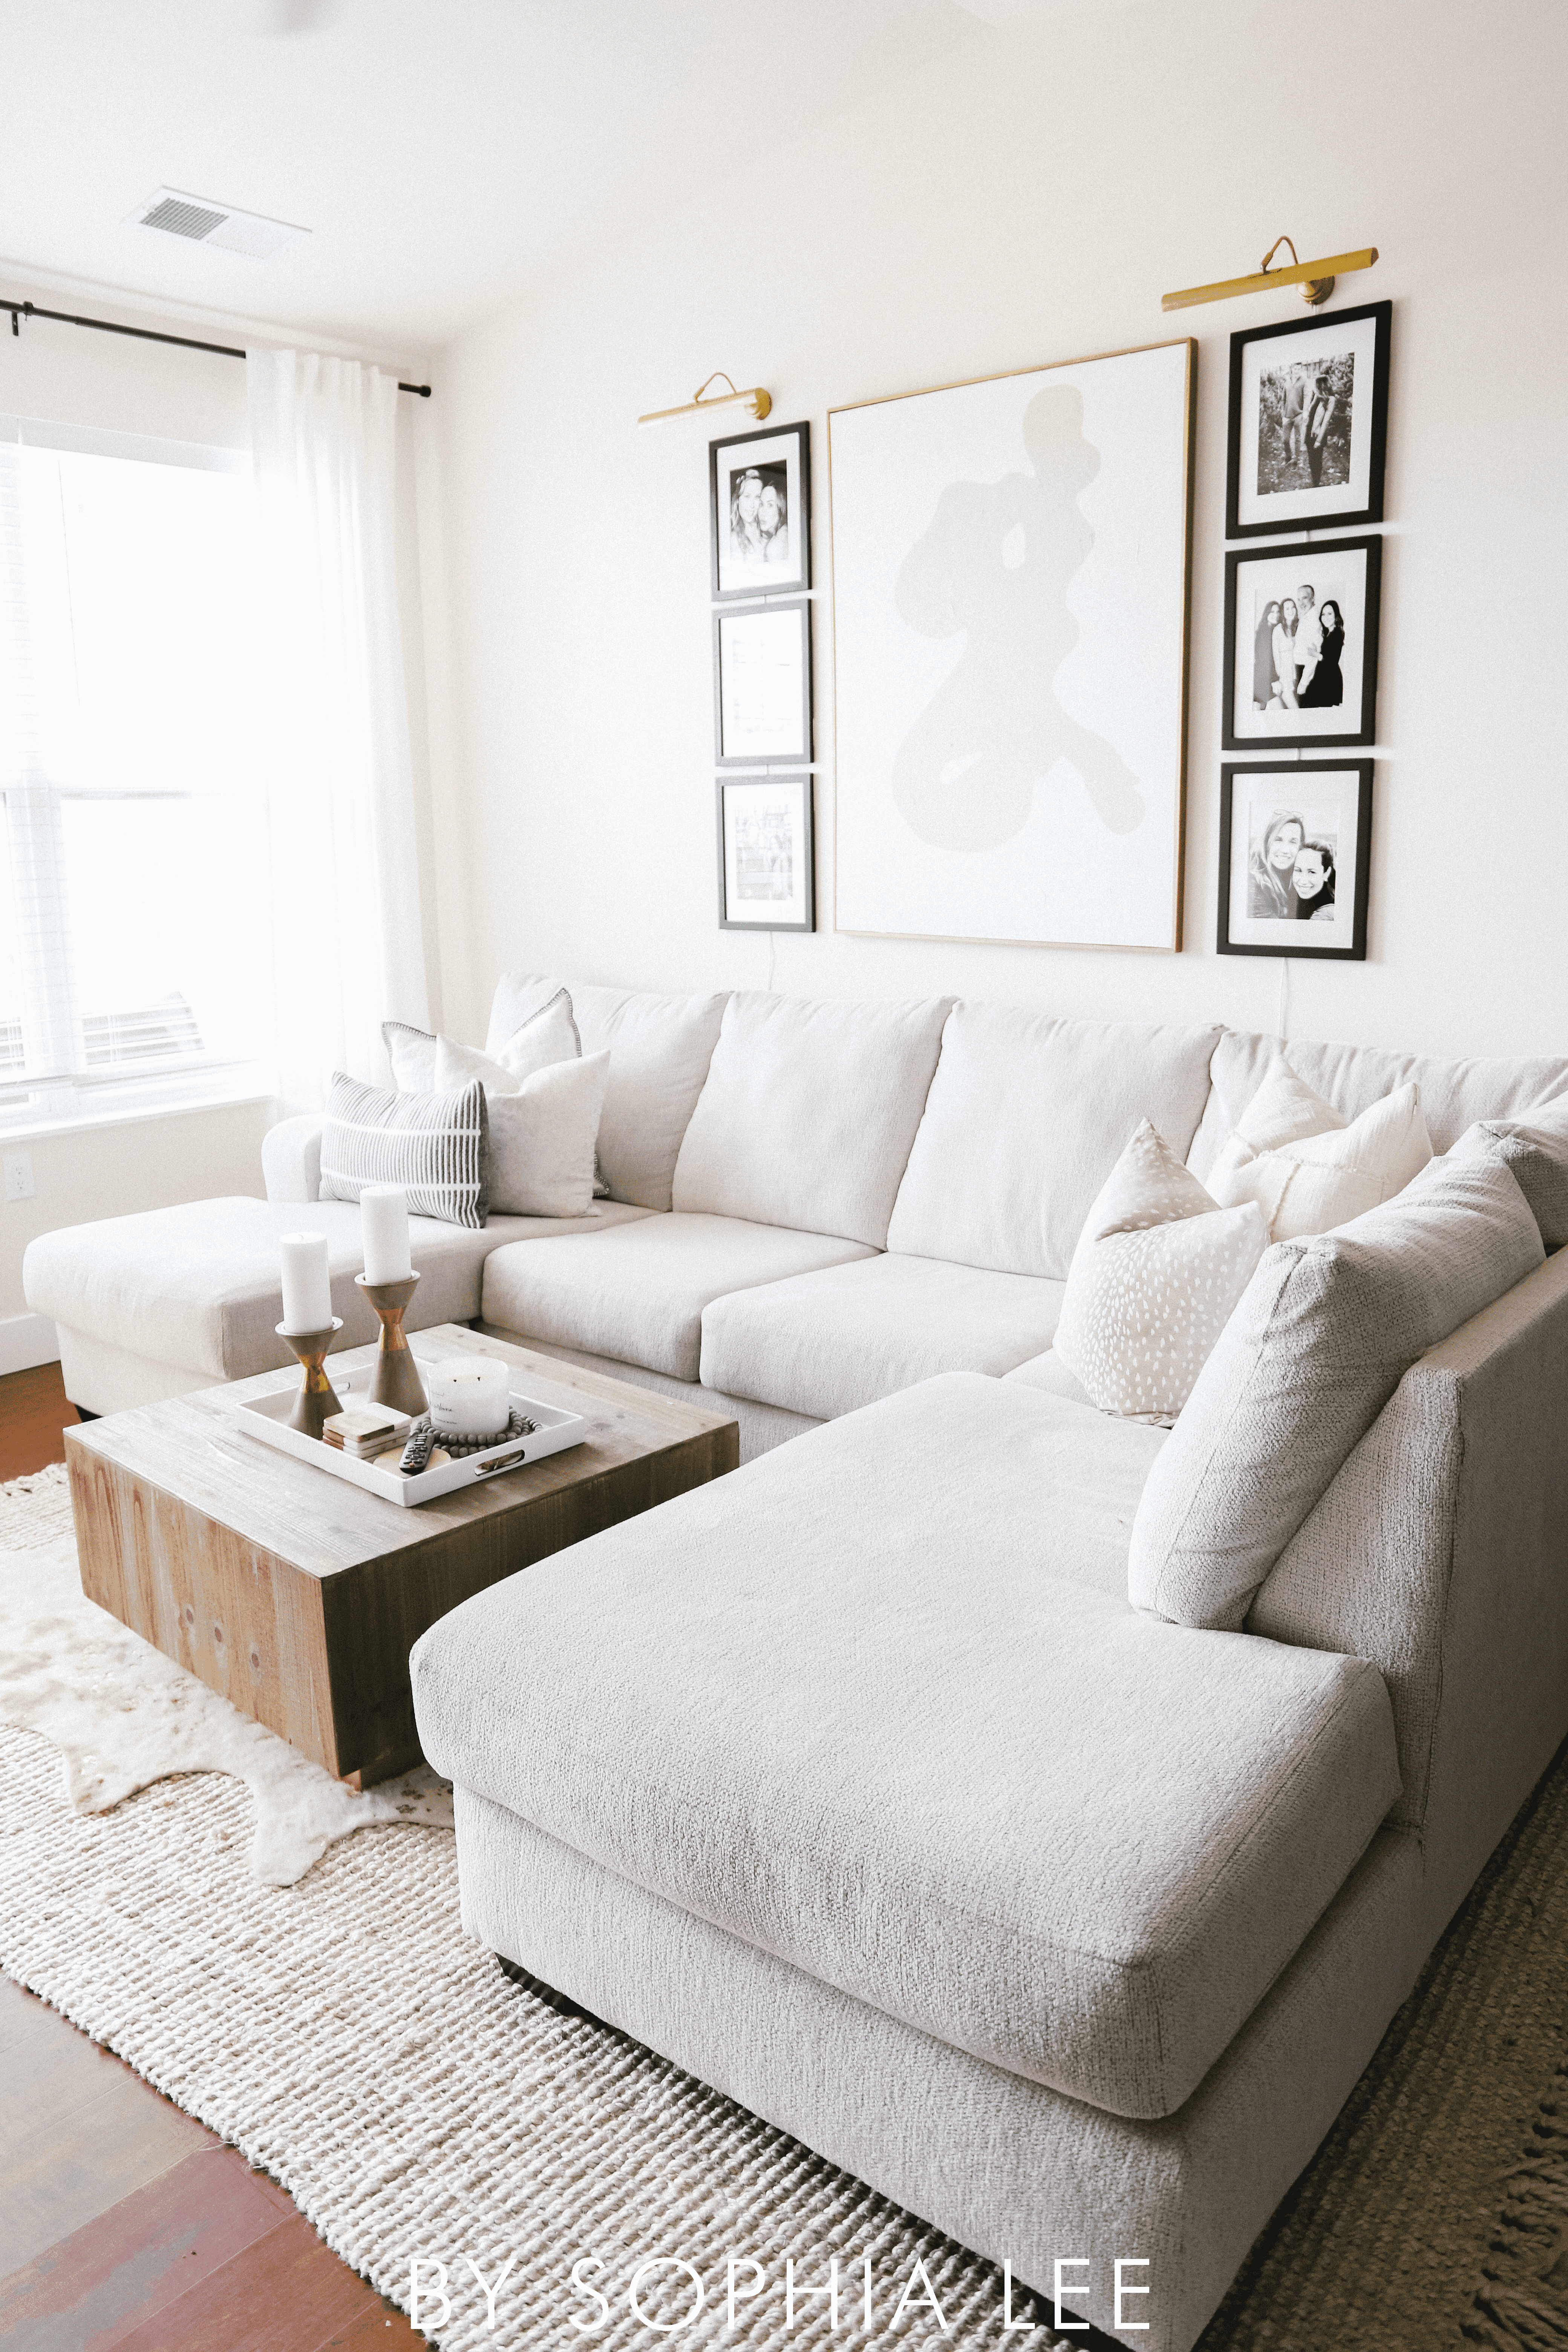 The Best Apartment Decorating on a Budget Tips You Must Know - By Sophia Lee